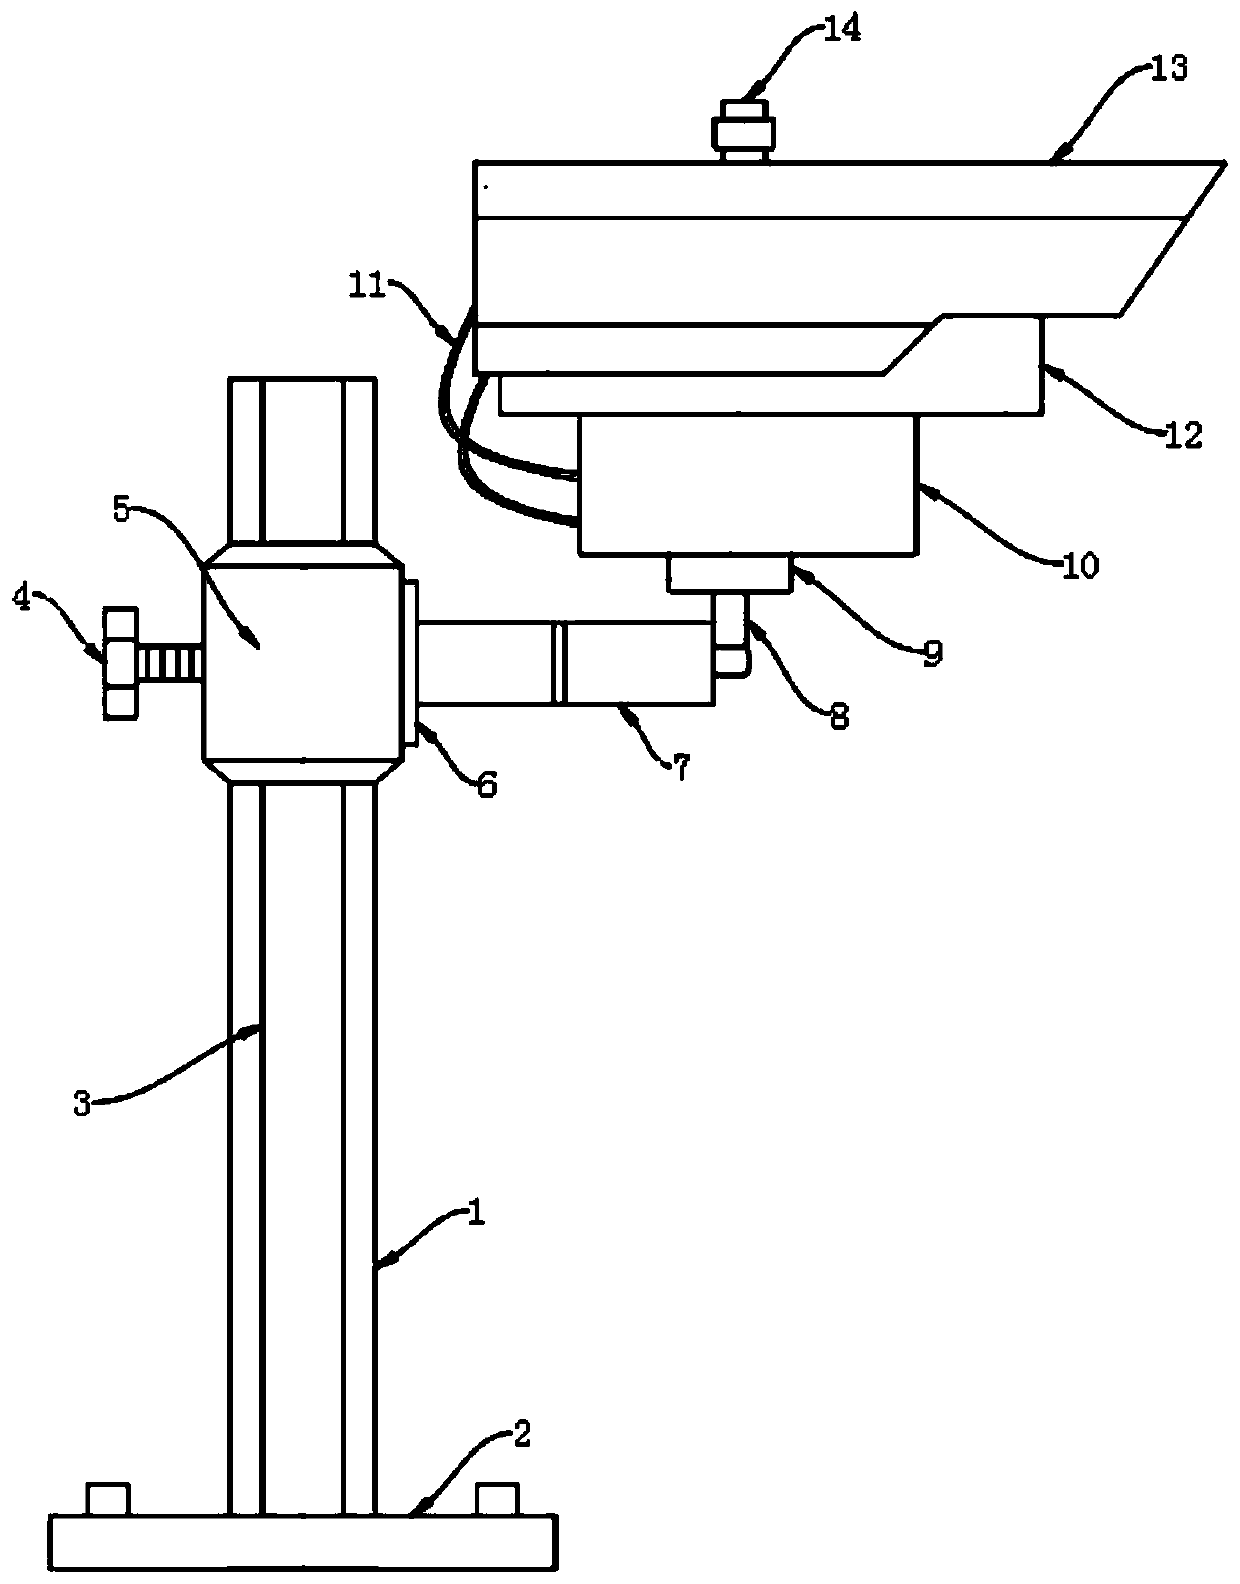 Monitoring device for security protection engineering